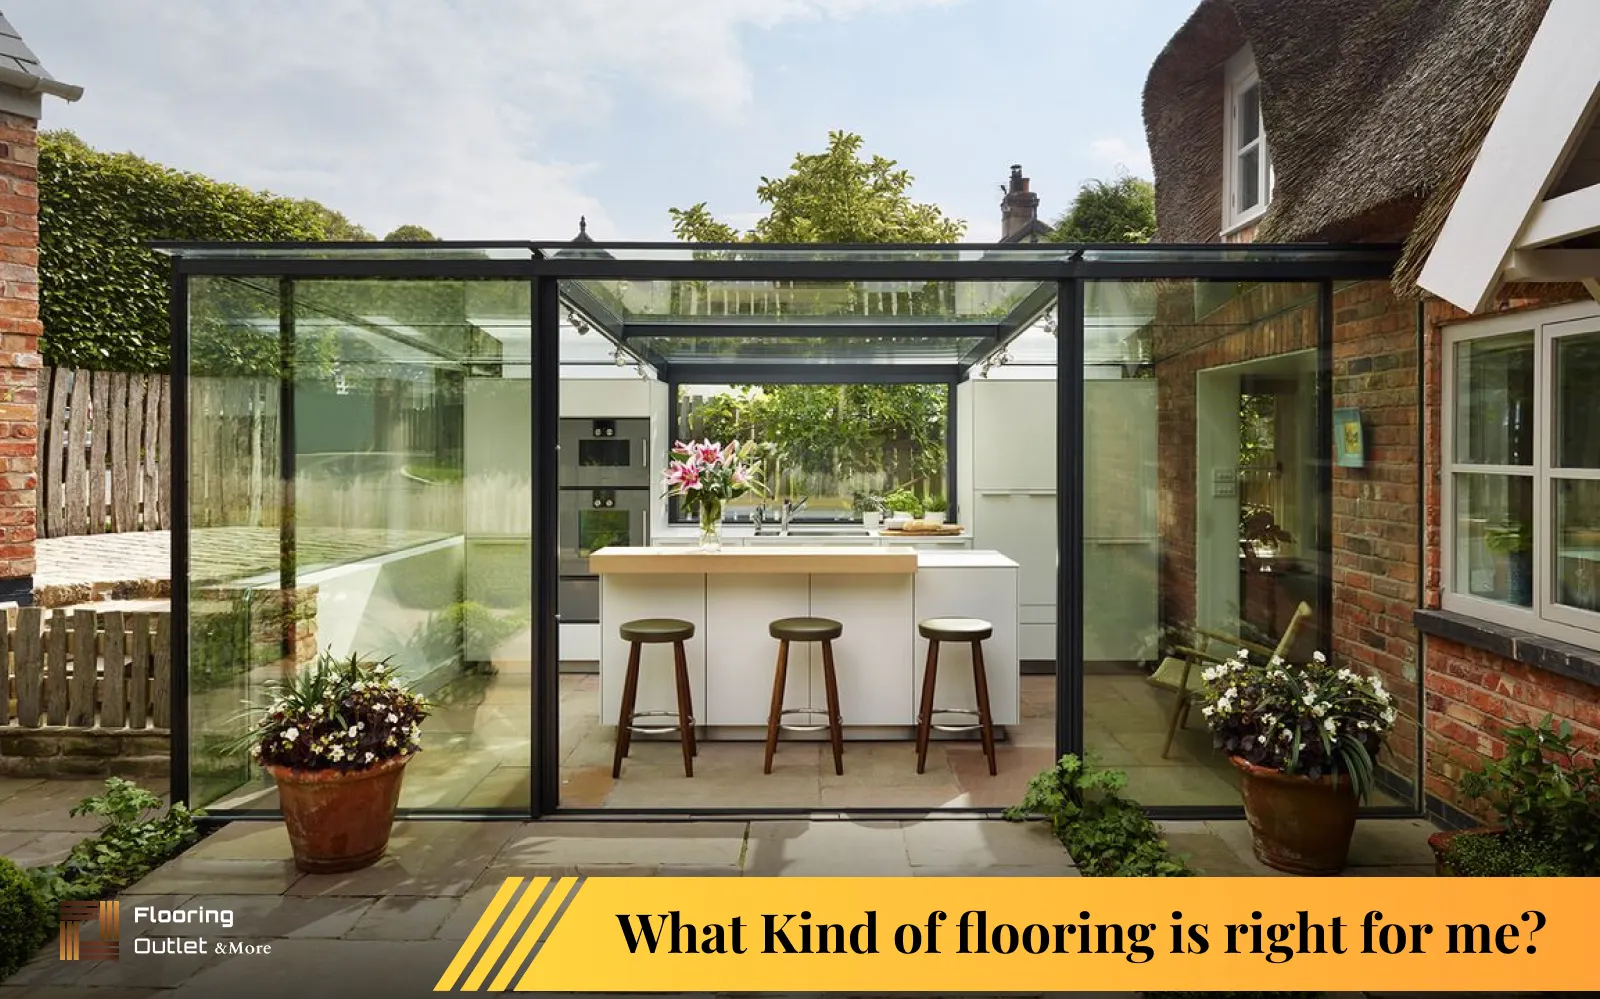 What Kind of flooring is right for me?